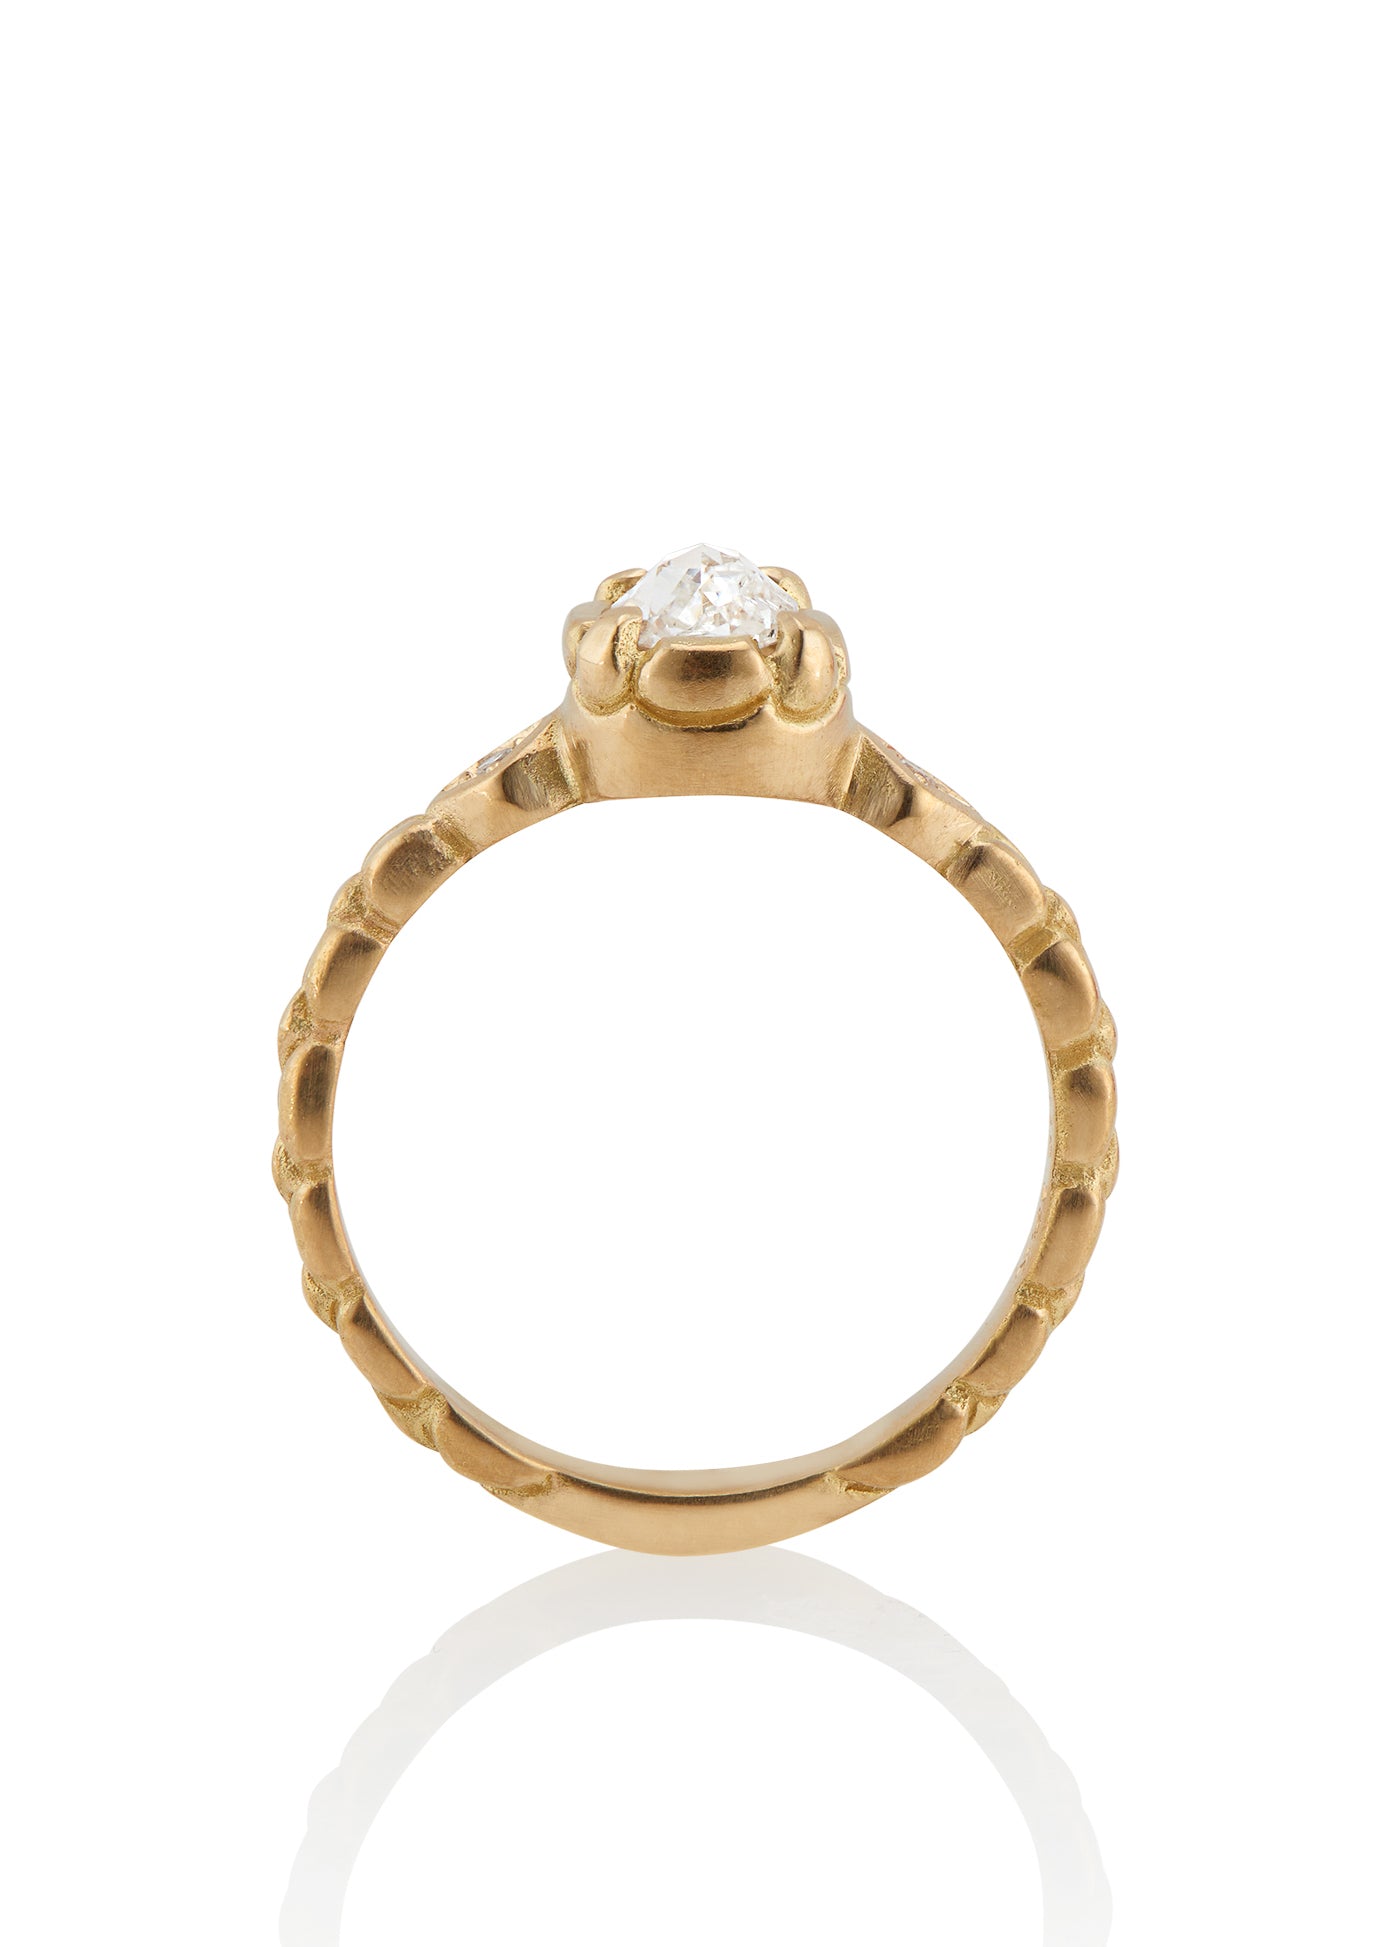 Stately and elegant, the Majestic ring is rich in exquisitely carved gold detail along the band, securing a pear-shaped rose cut diamond that commands attention—a piece evocative of royalty. 